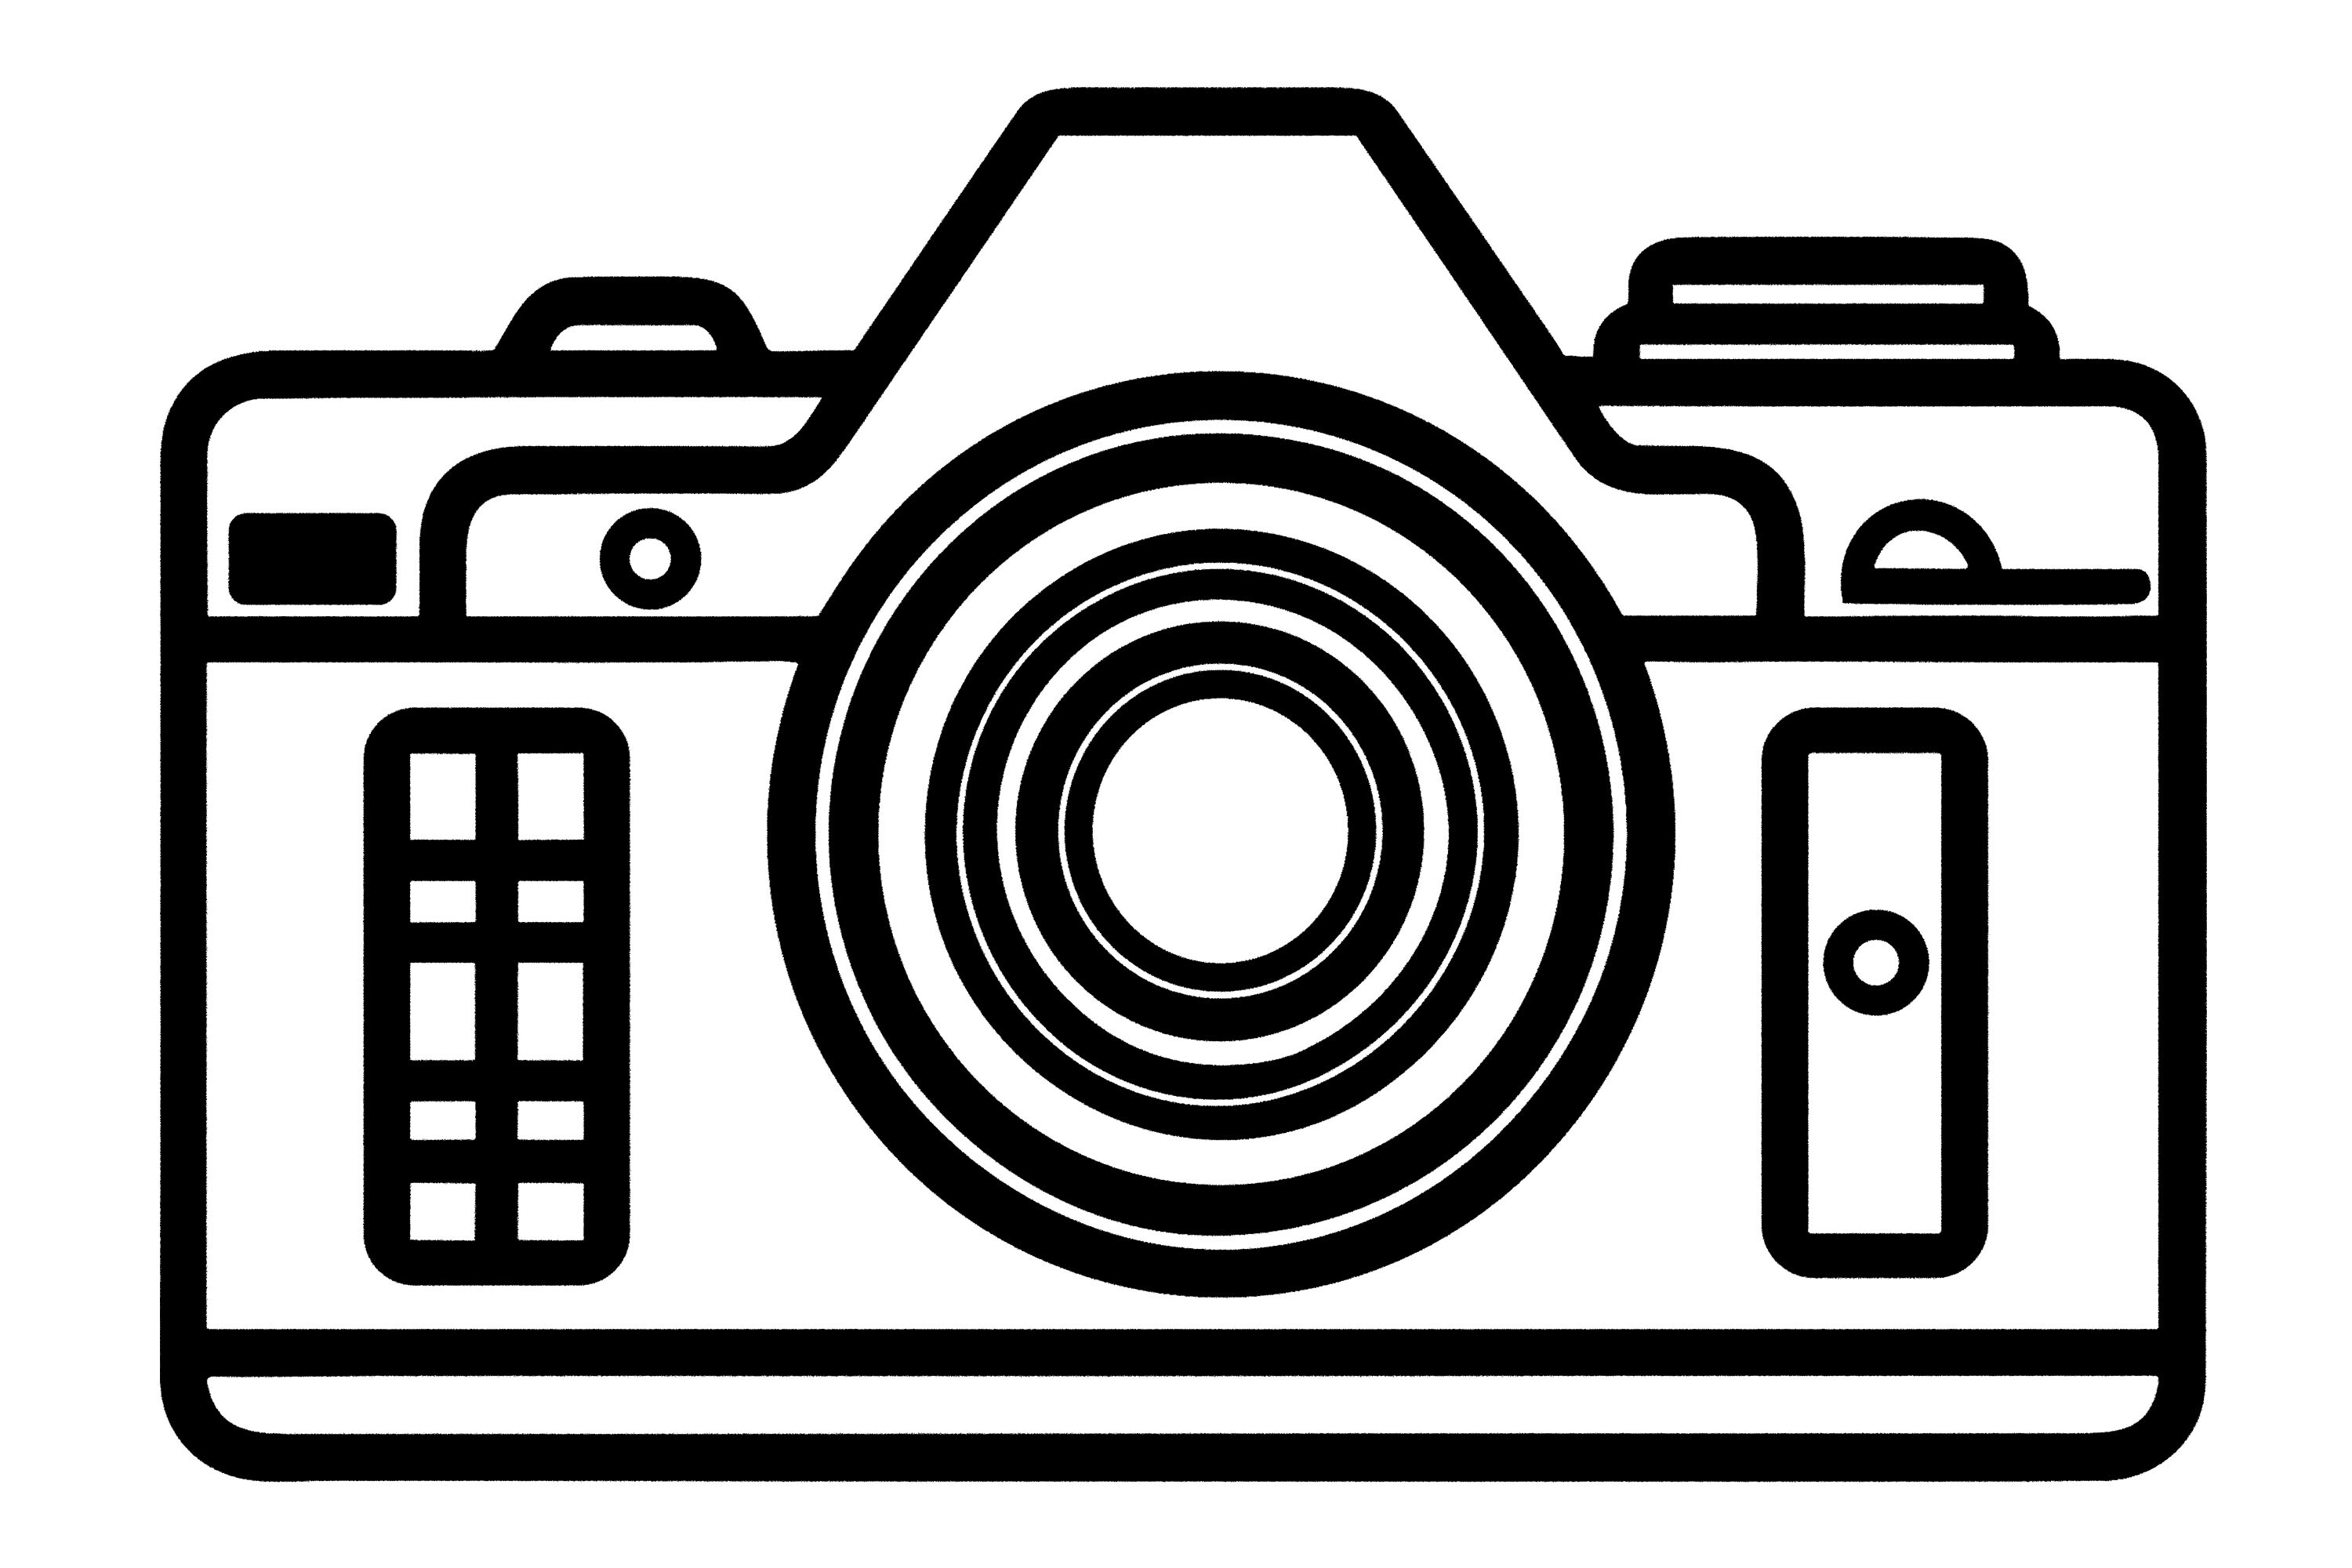 Camera Clipart Graphic by Illustrately · Creative Fabrica